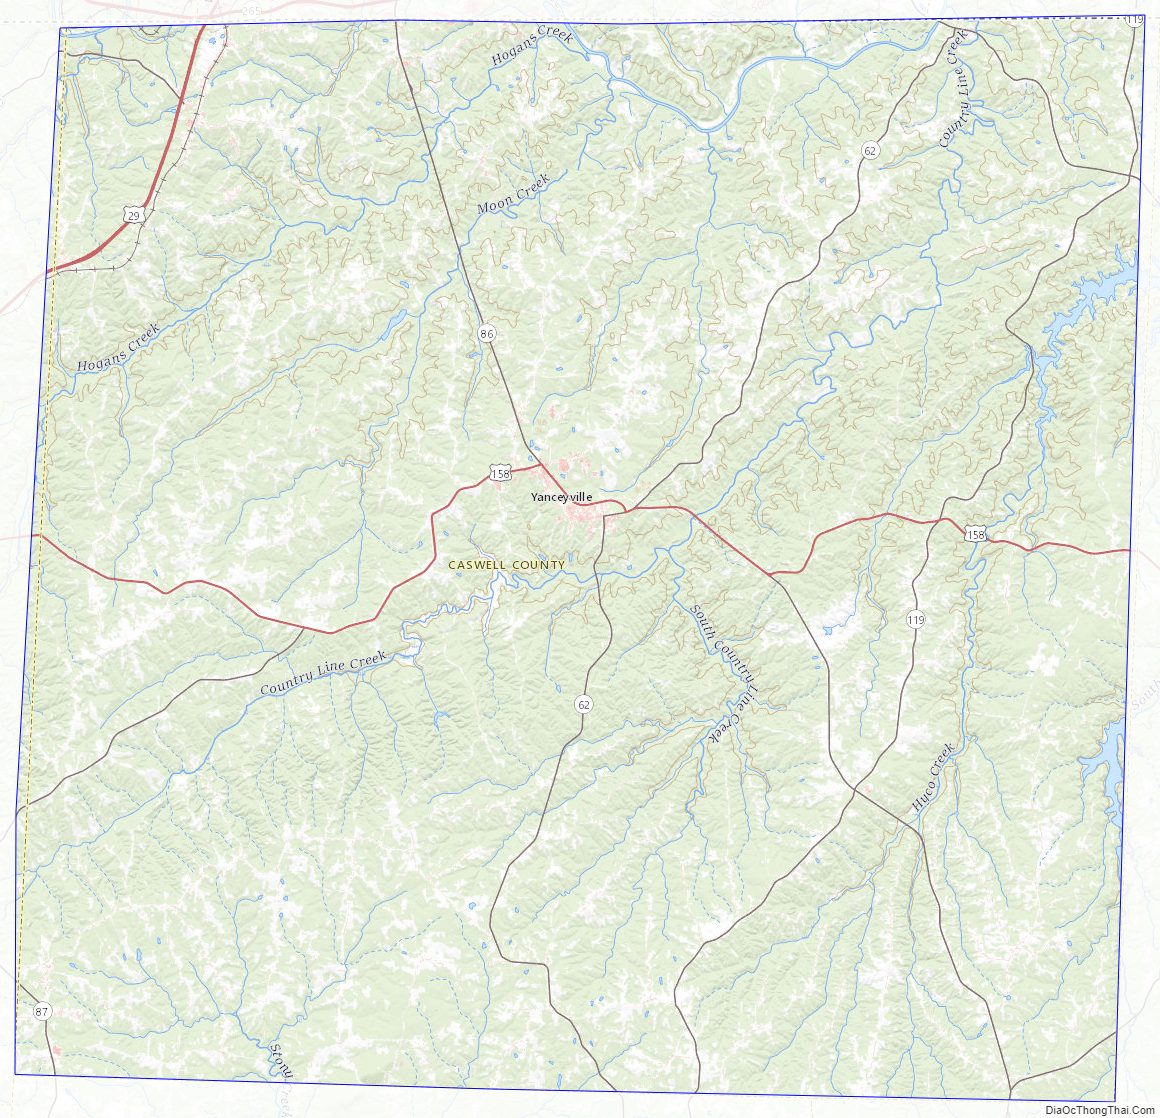 Topographic map of Caswell County, North Carolina